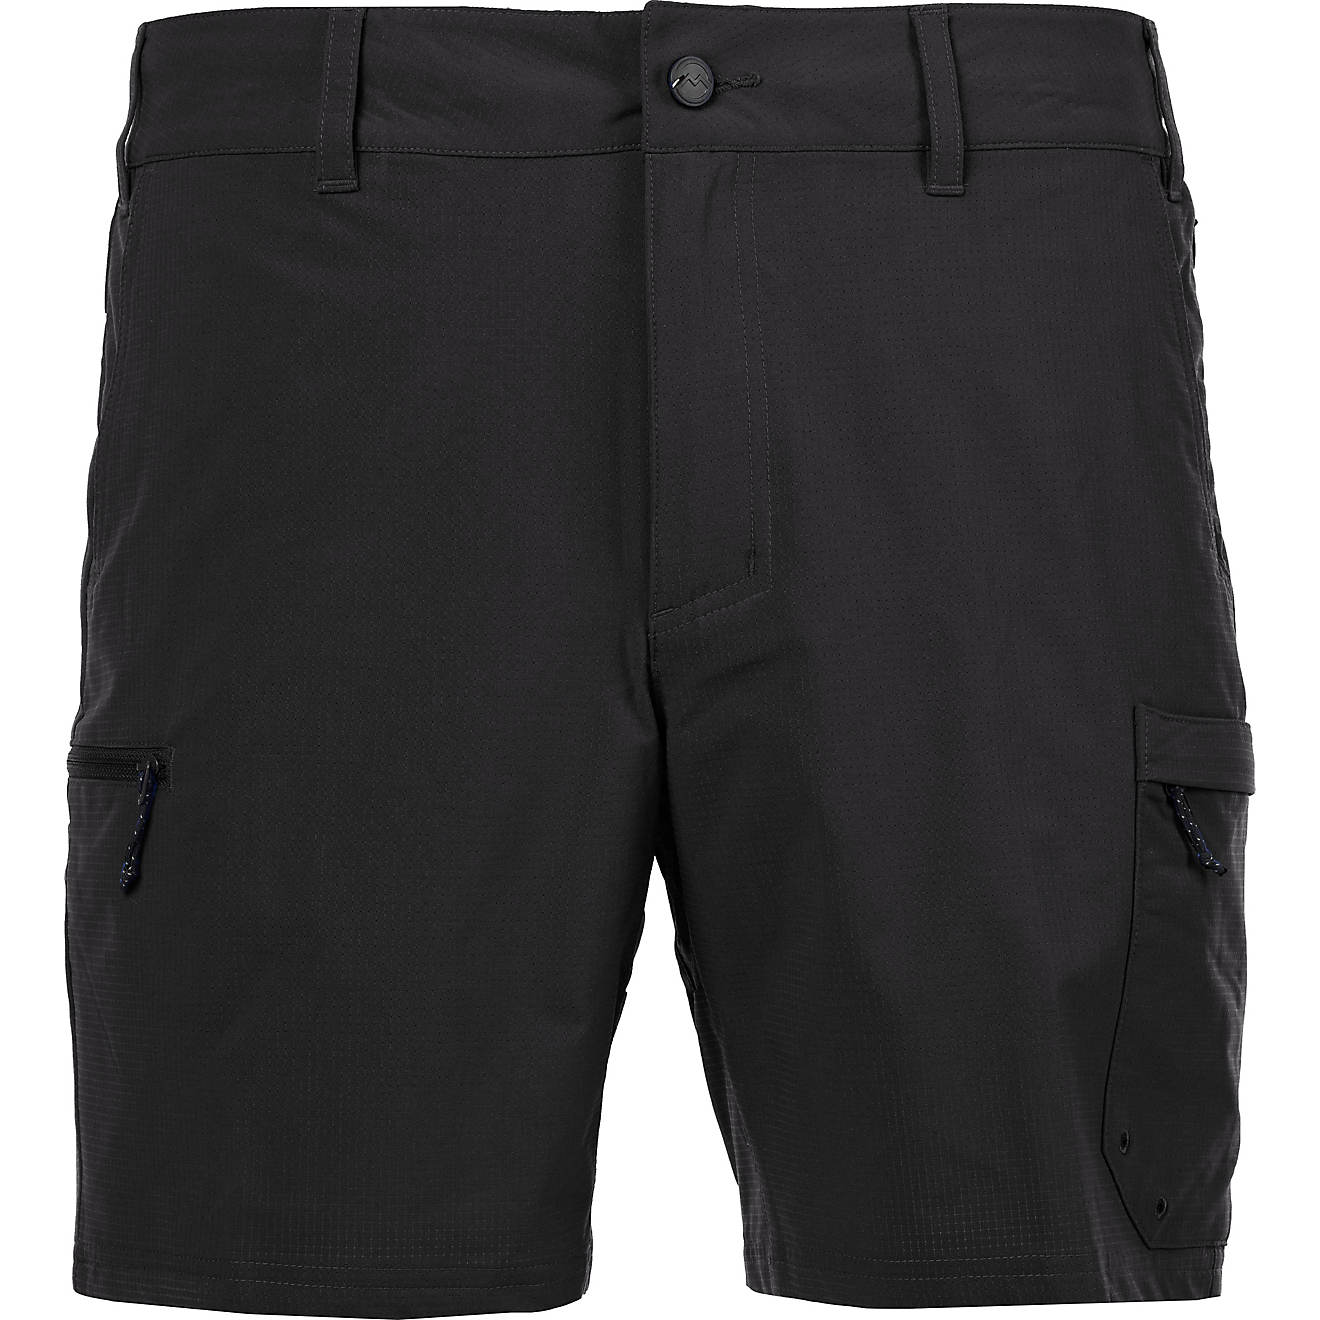 Magellan Outdoors Men's Pro Angler Hybrid Shorts 7 in                                                                            - view number 1